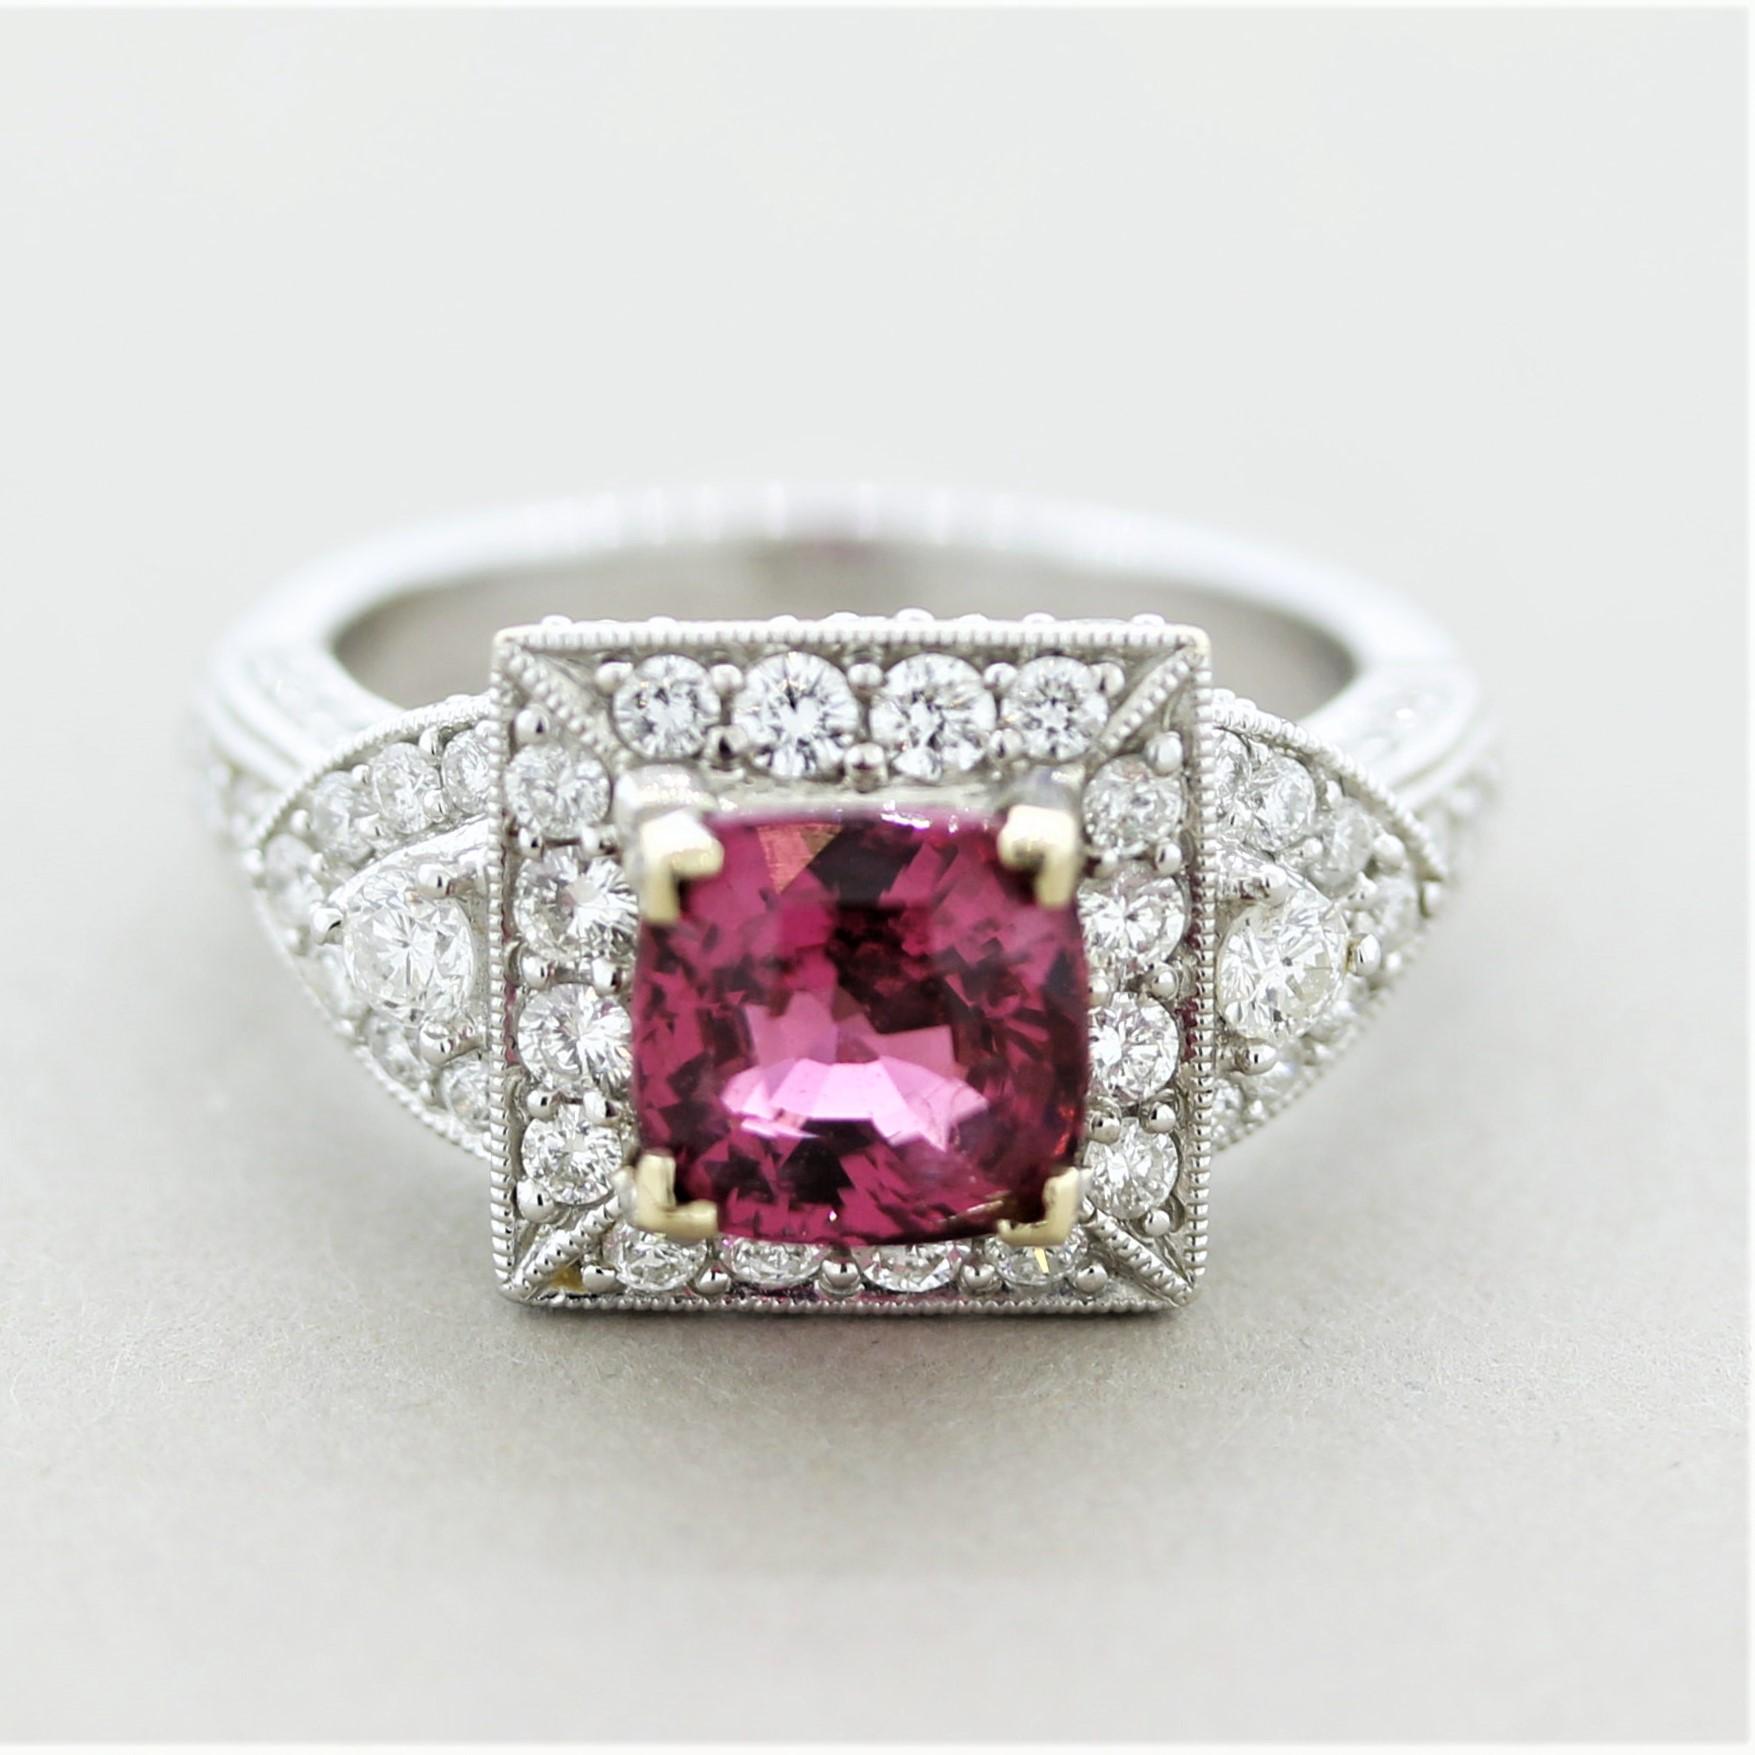 A classic ring featuring a fine spinel weighing 1.70 carats. It has a slighting pinkish-red color that is vivid, bright, and full of life. It is complemented by 1.30 carats of round brilliant-cut diamonds set all around the ring. Made in 18k white